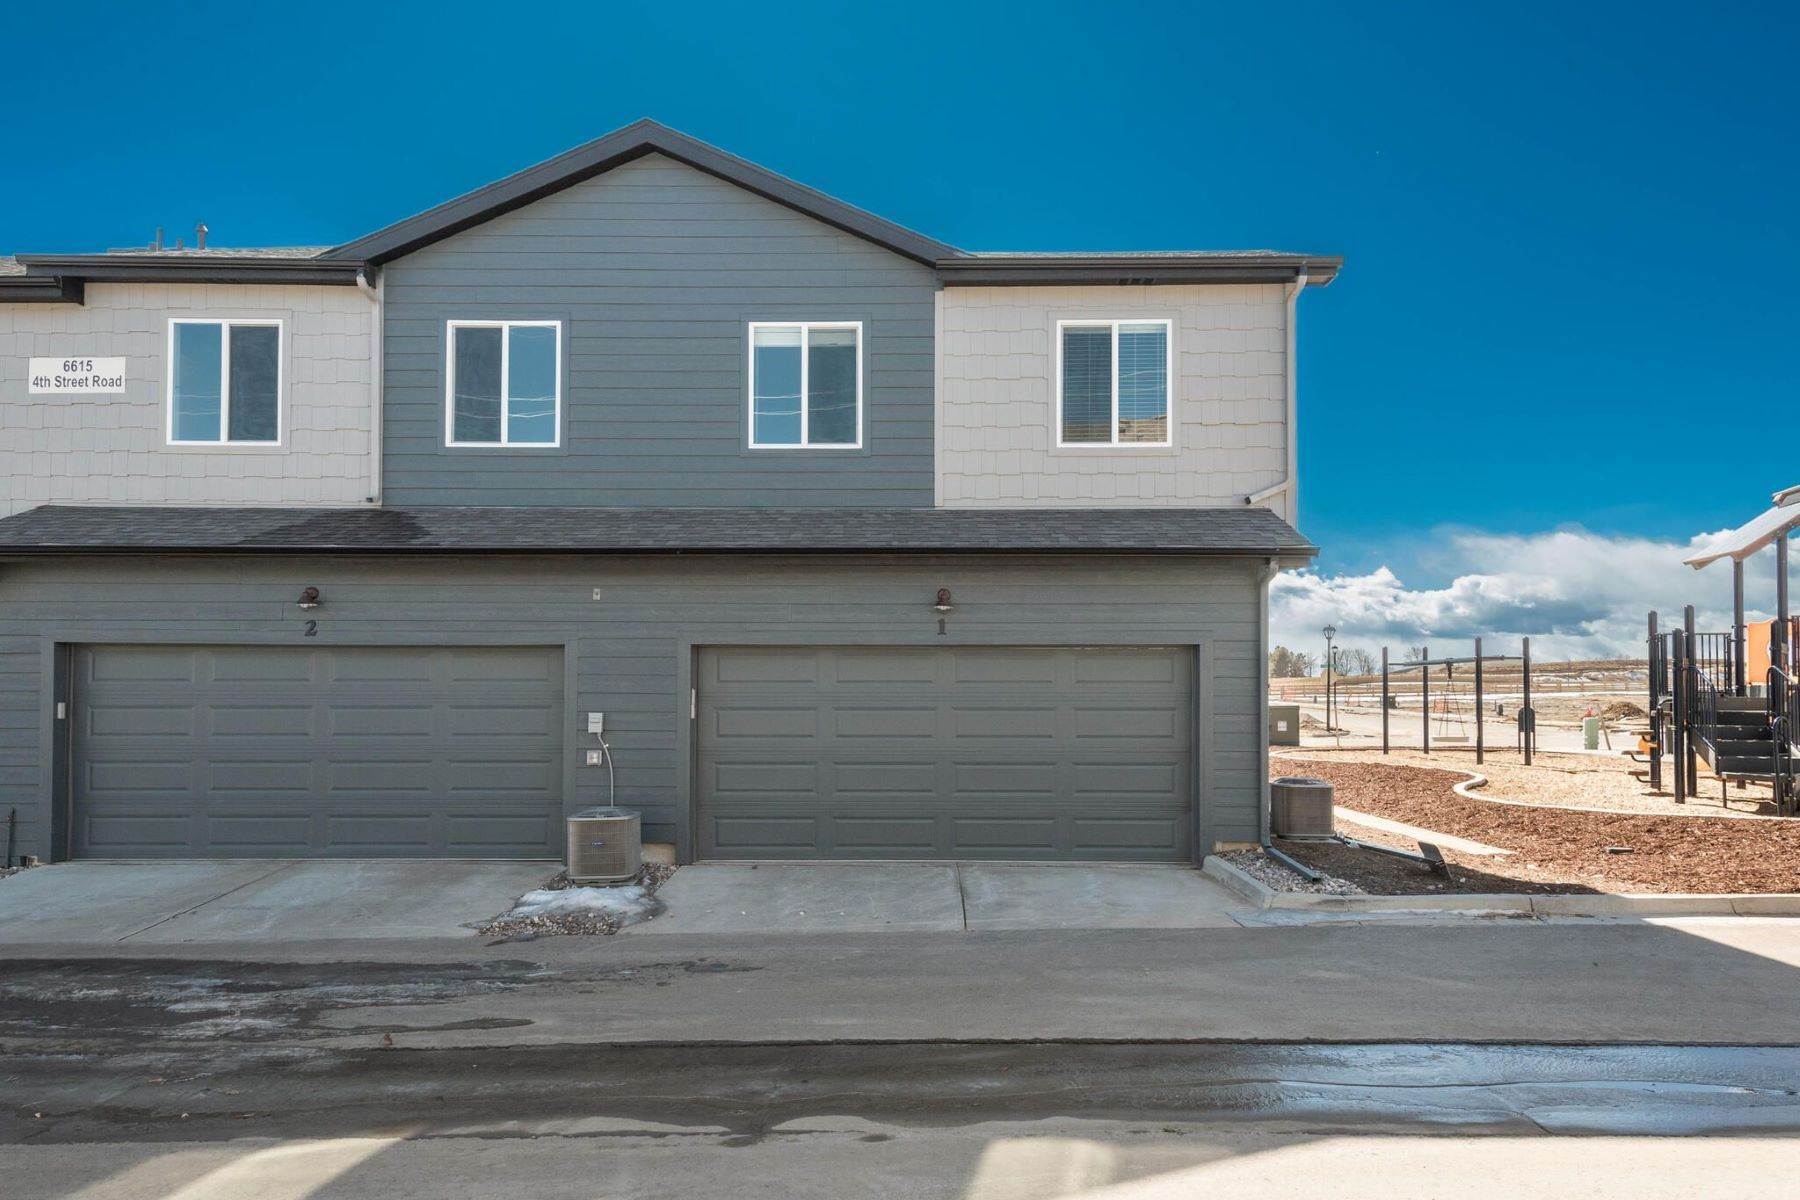 29. Townhouse for Active at This beautiful 3 bedroom, 2.5 bath townhome is brand new and just 4 months old! 6615 4th Street Road, #1 Greeley, Colorado 80634 United States